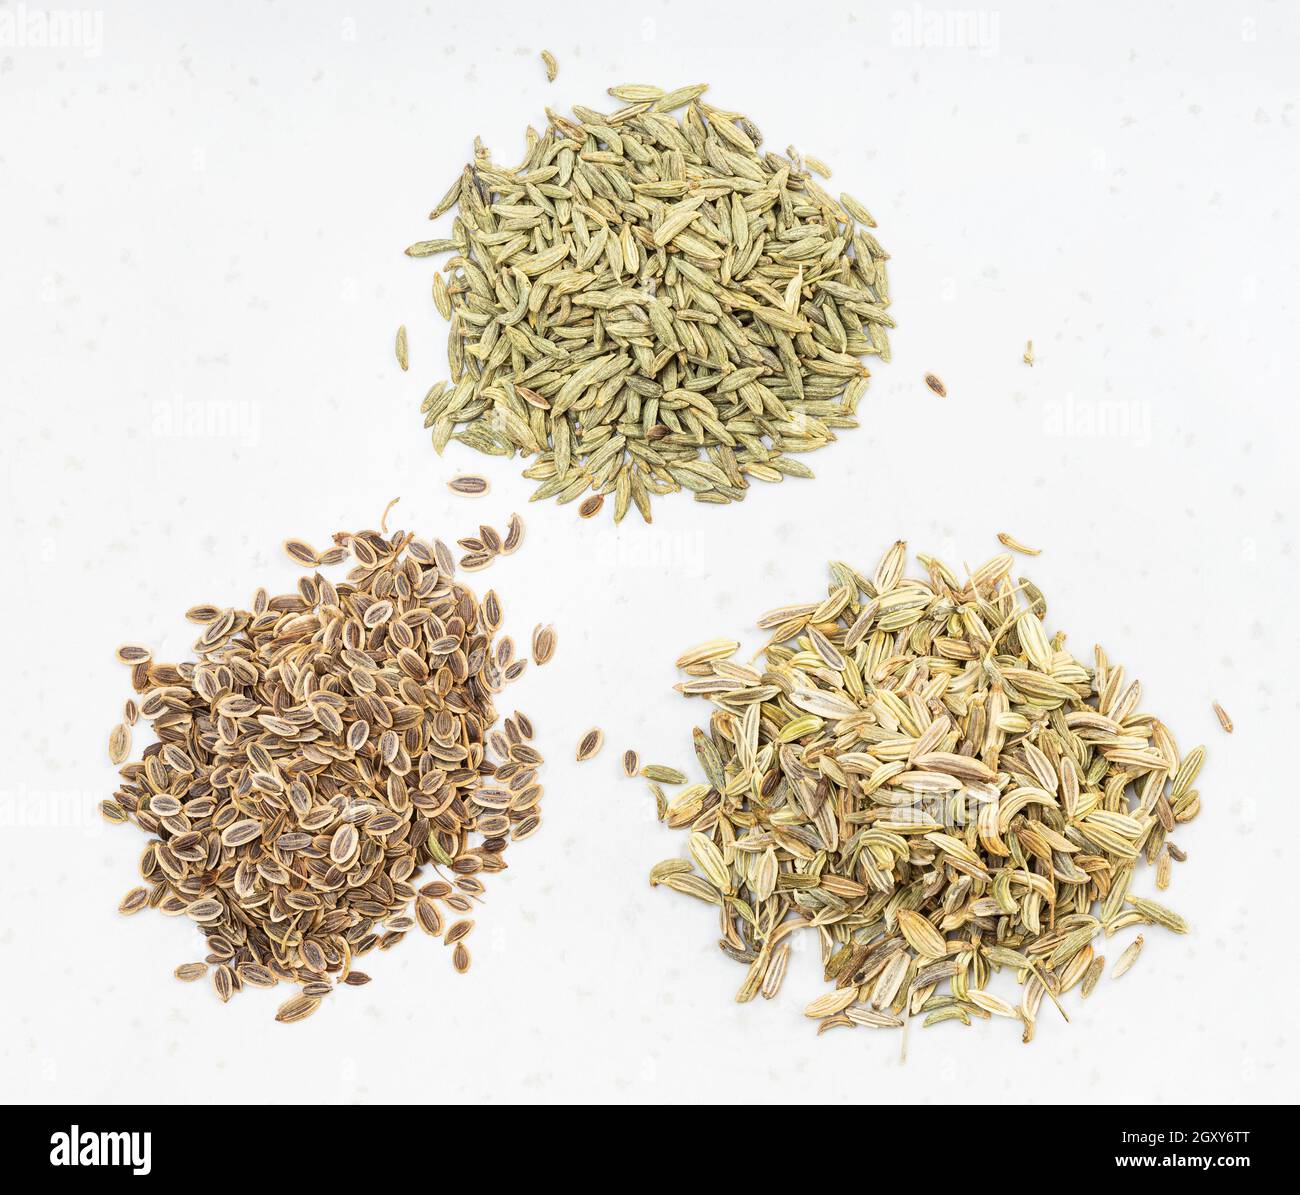 three piles of anise, dill and fennel seeds on gray ceramic plate Stock Photo